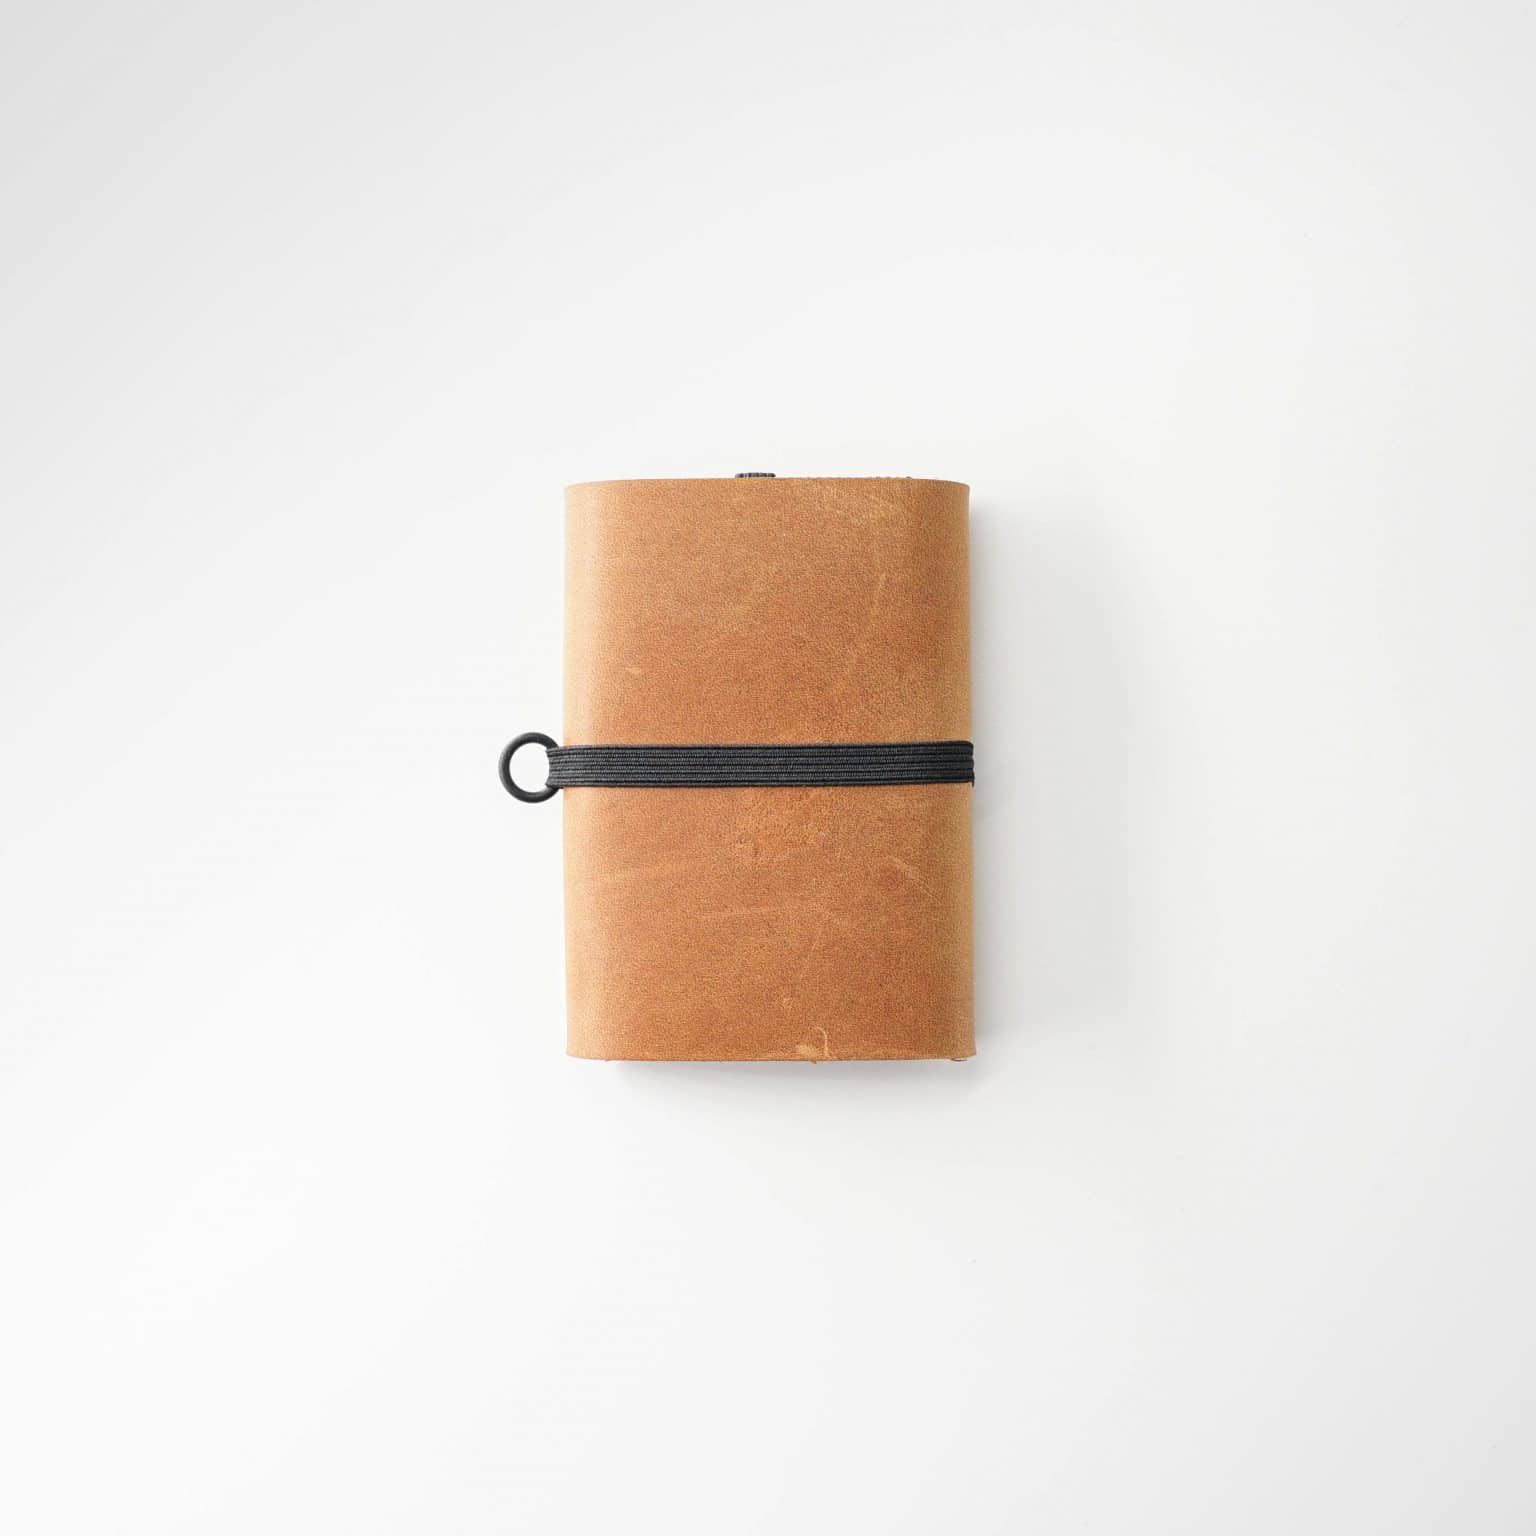 Handcrafted minimalist wallet showcasing artisanal quality. t